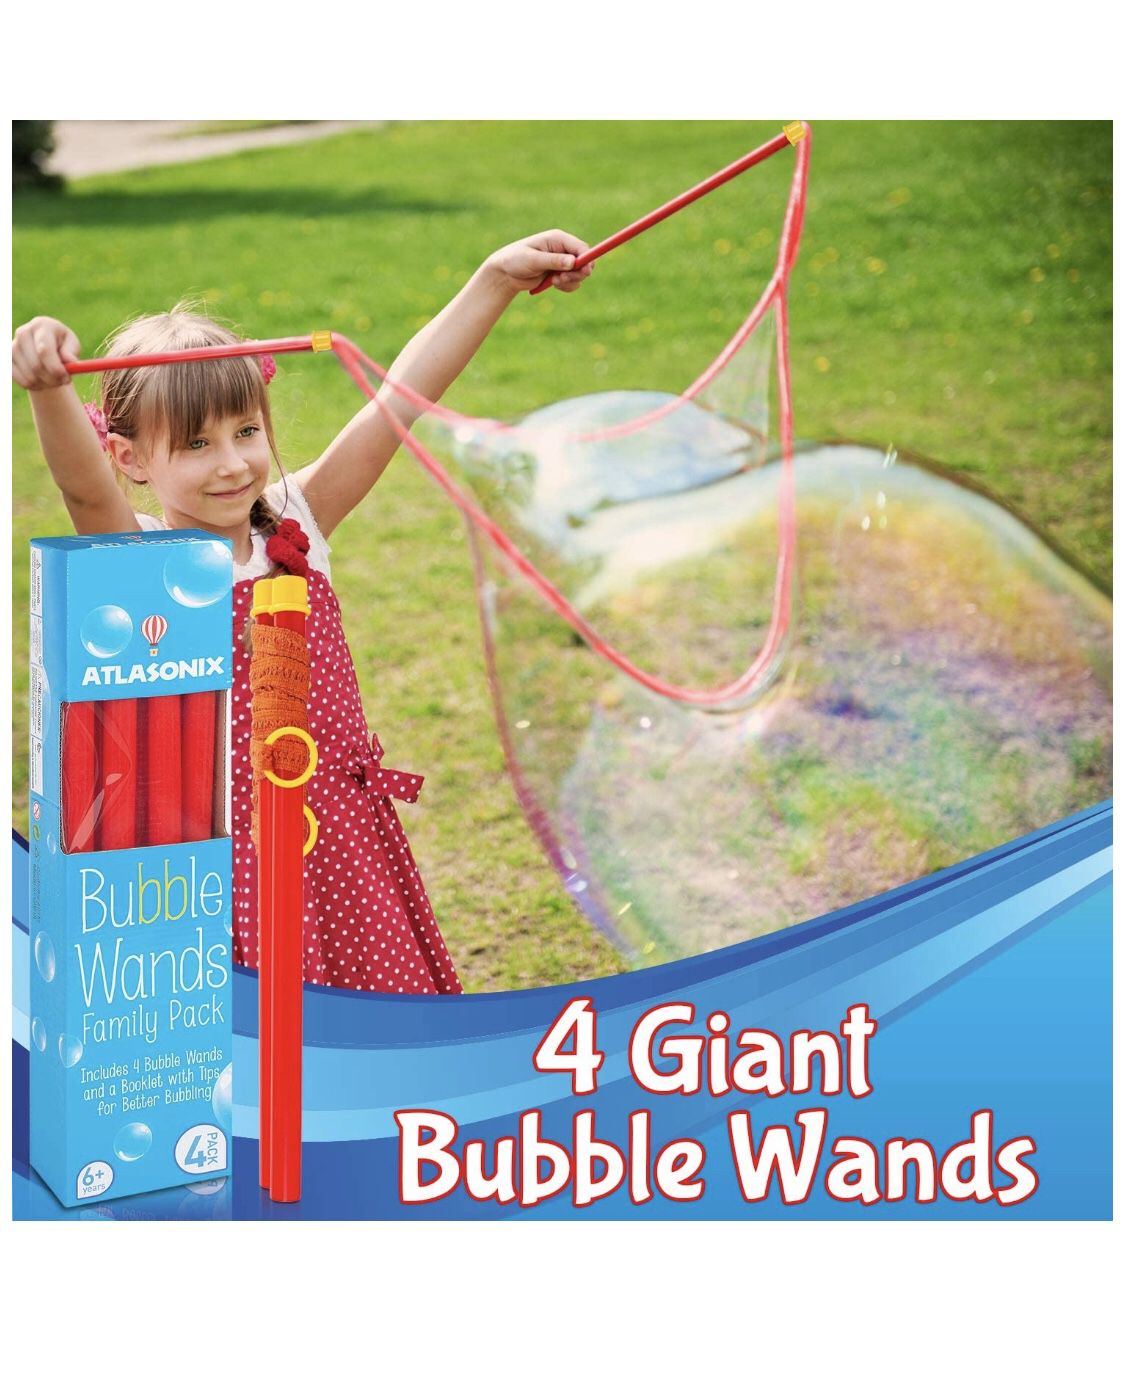 Big Bubble Wands for Giant Bubbles, 4 Big Wands